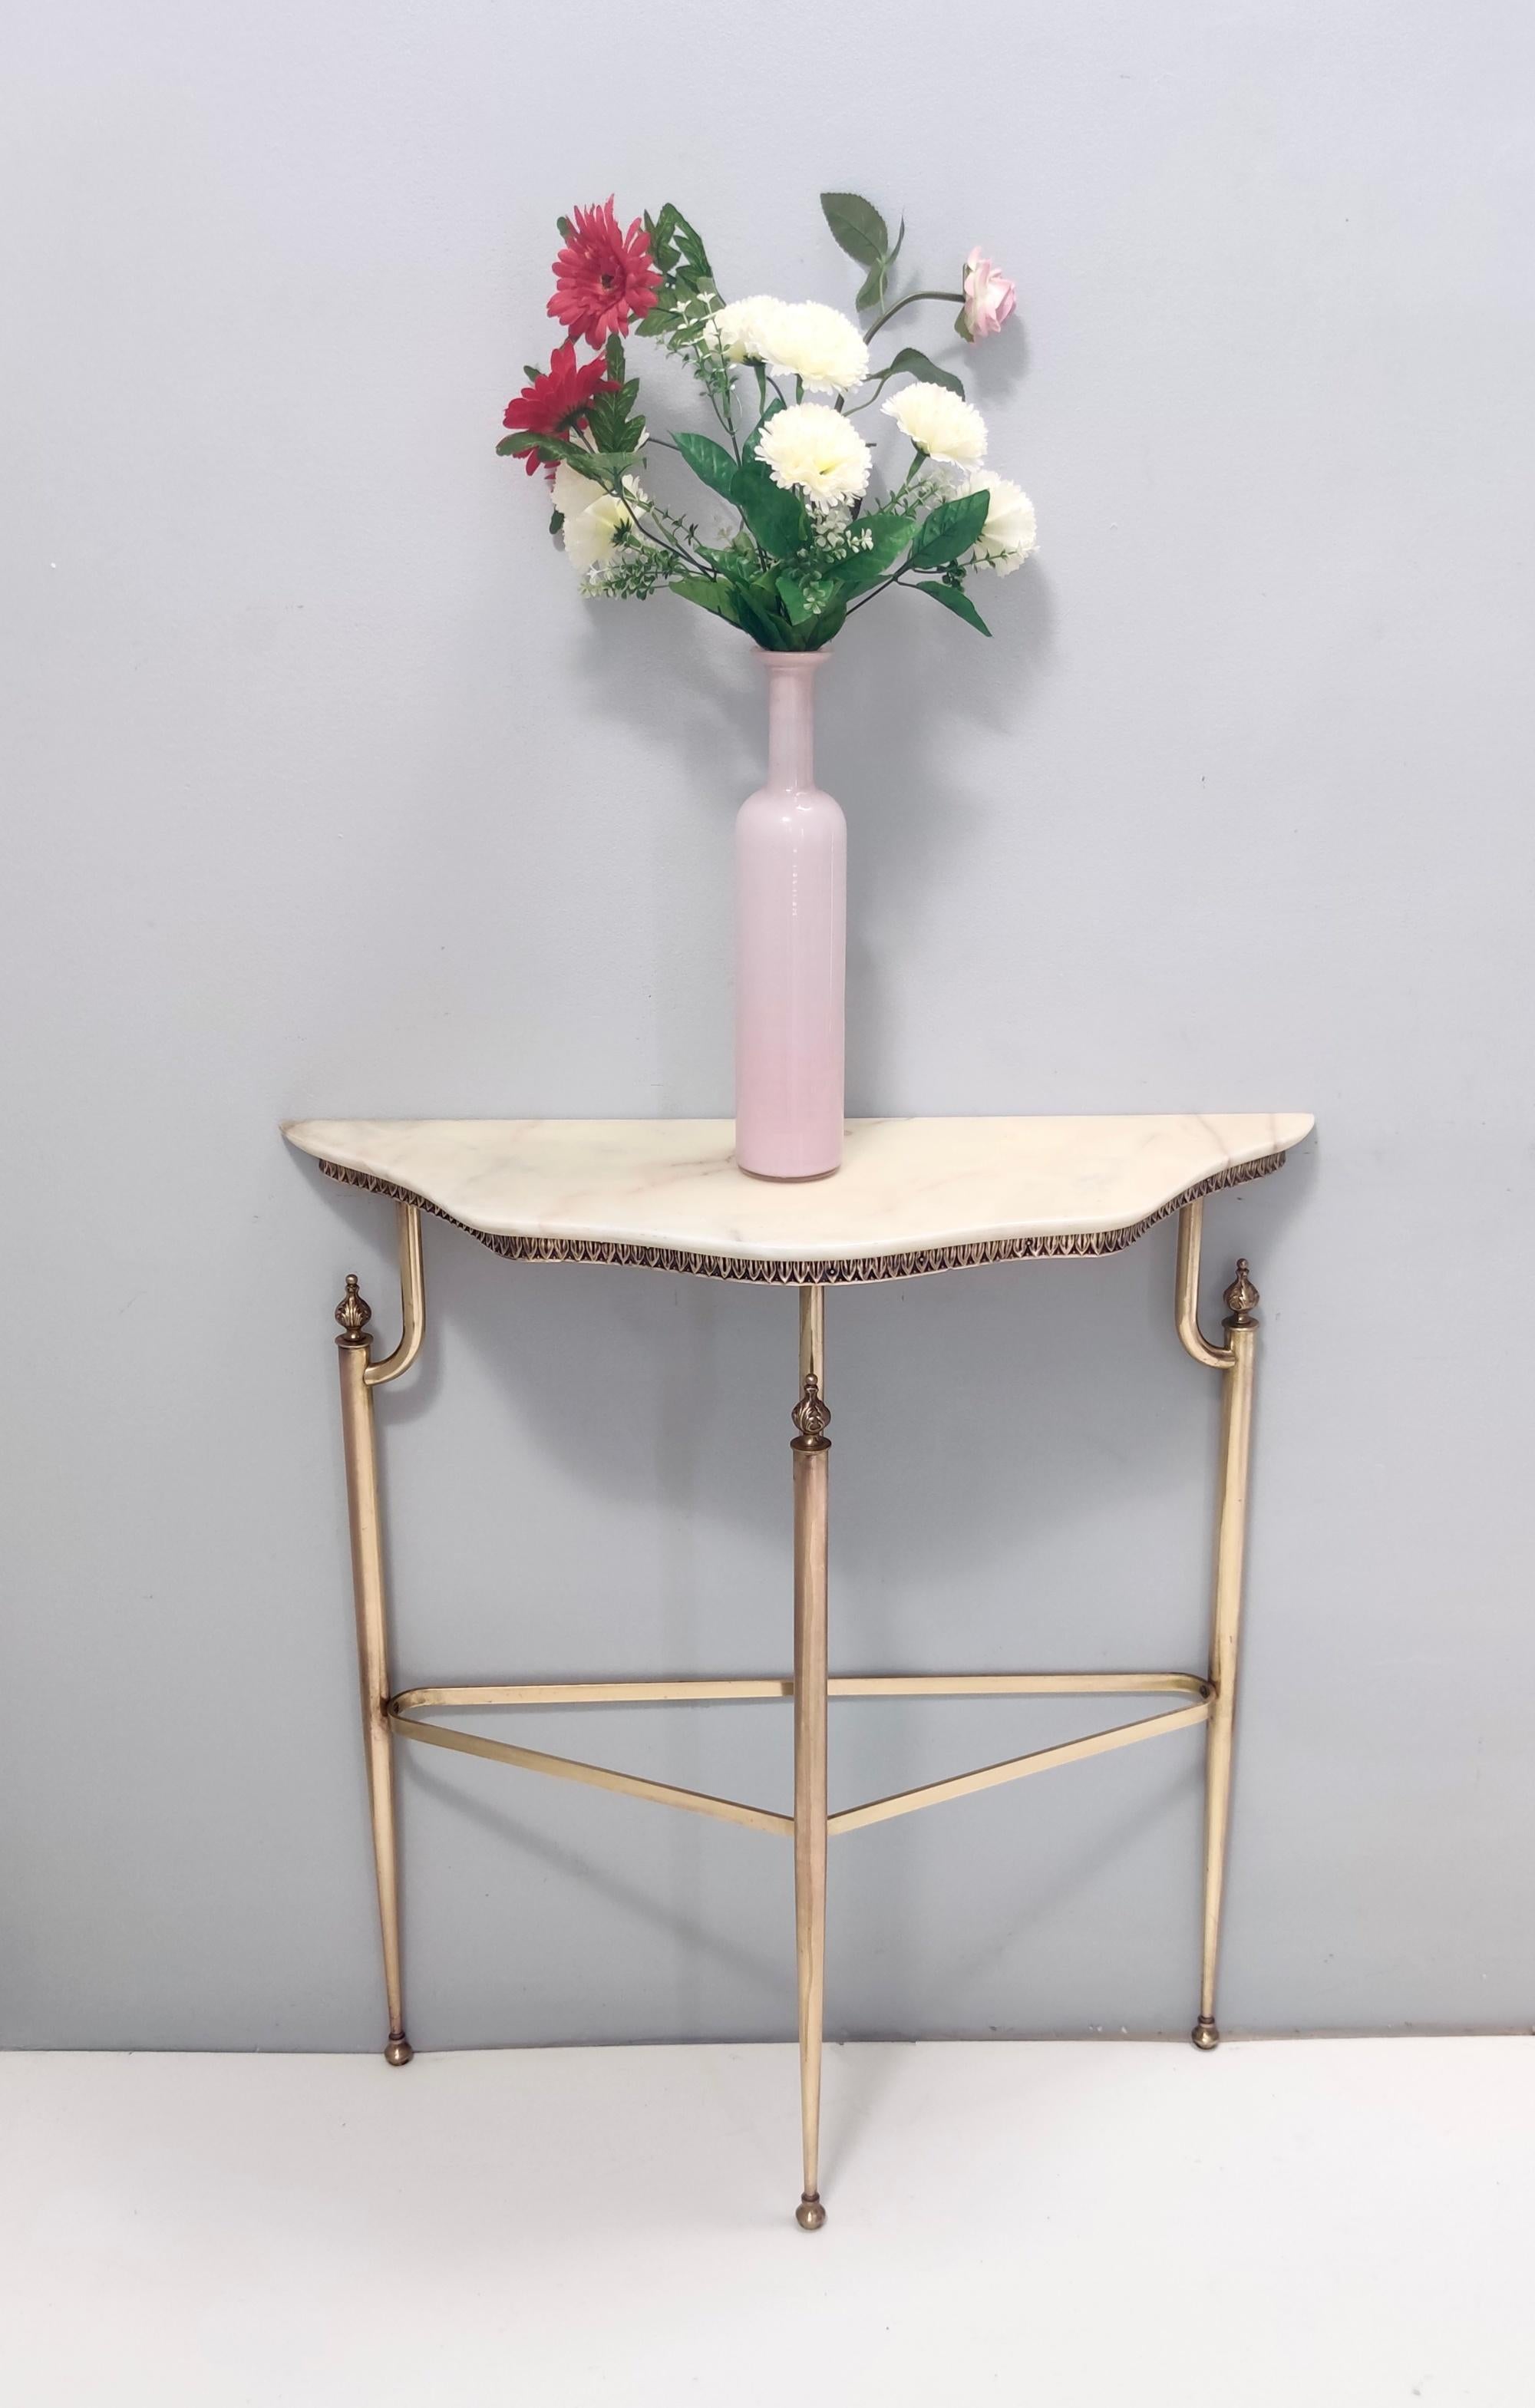 Made in Italy, 1950s - 1960s.
This console table features a Portuguese pink marble top and a brass frame. 
It is a vintage item, therefore it might show slight traces of use, but it can be considered as in excellent original condition and ready to